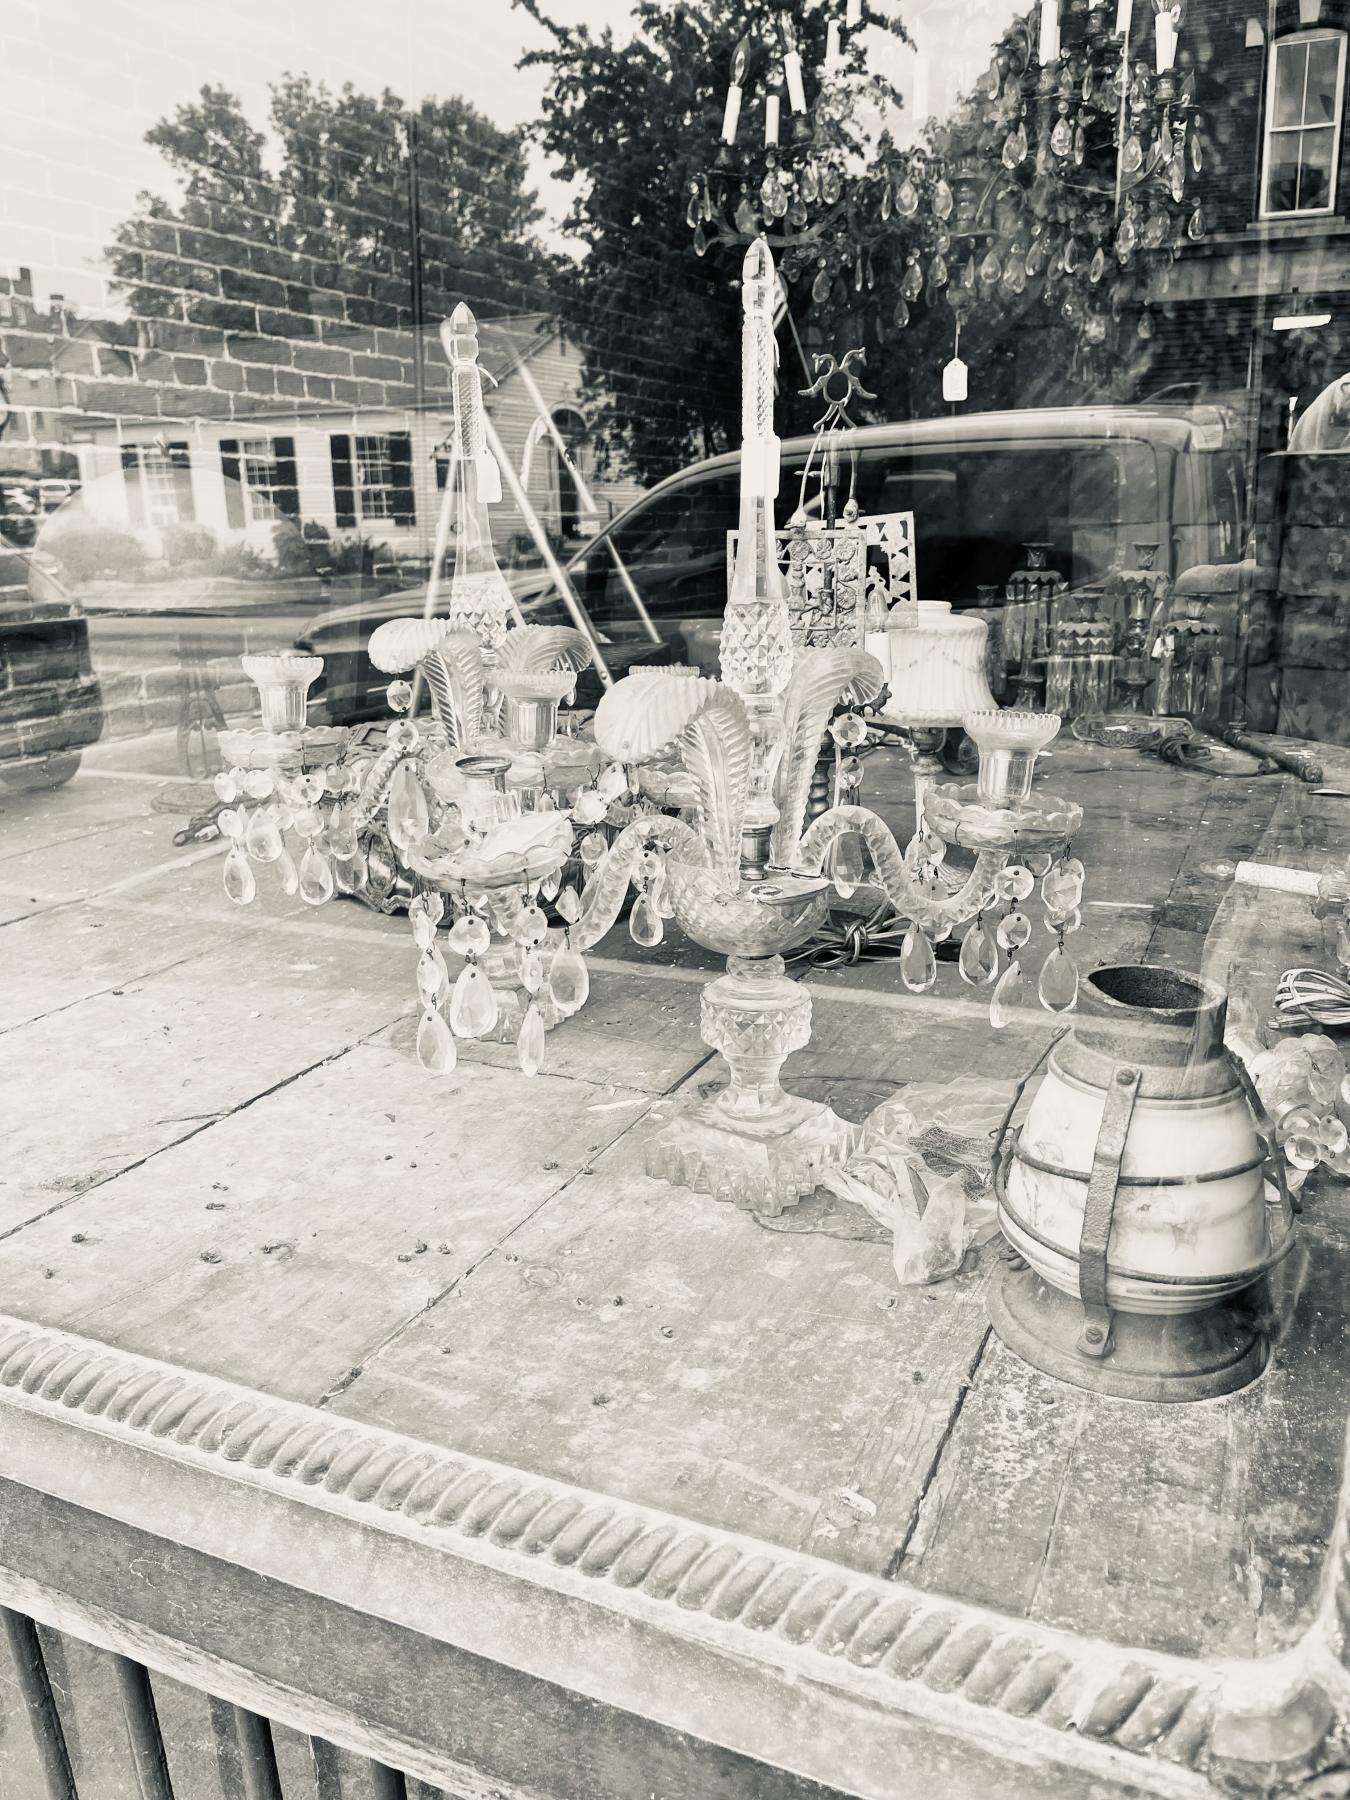 assorted antiques in the shop window messily arranged. This image is in black and white.